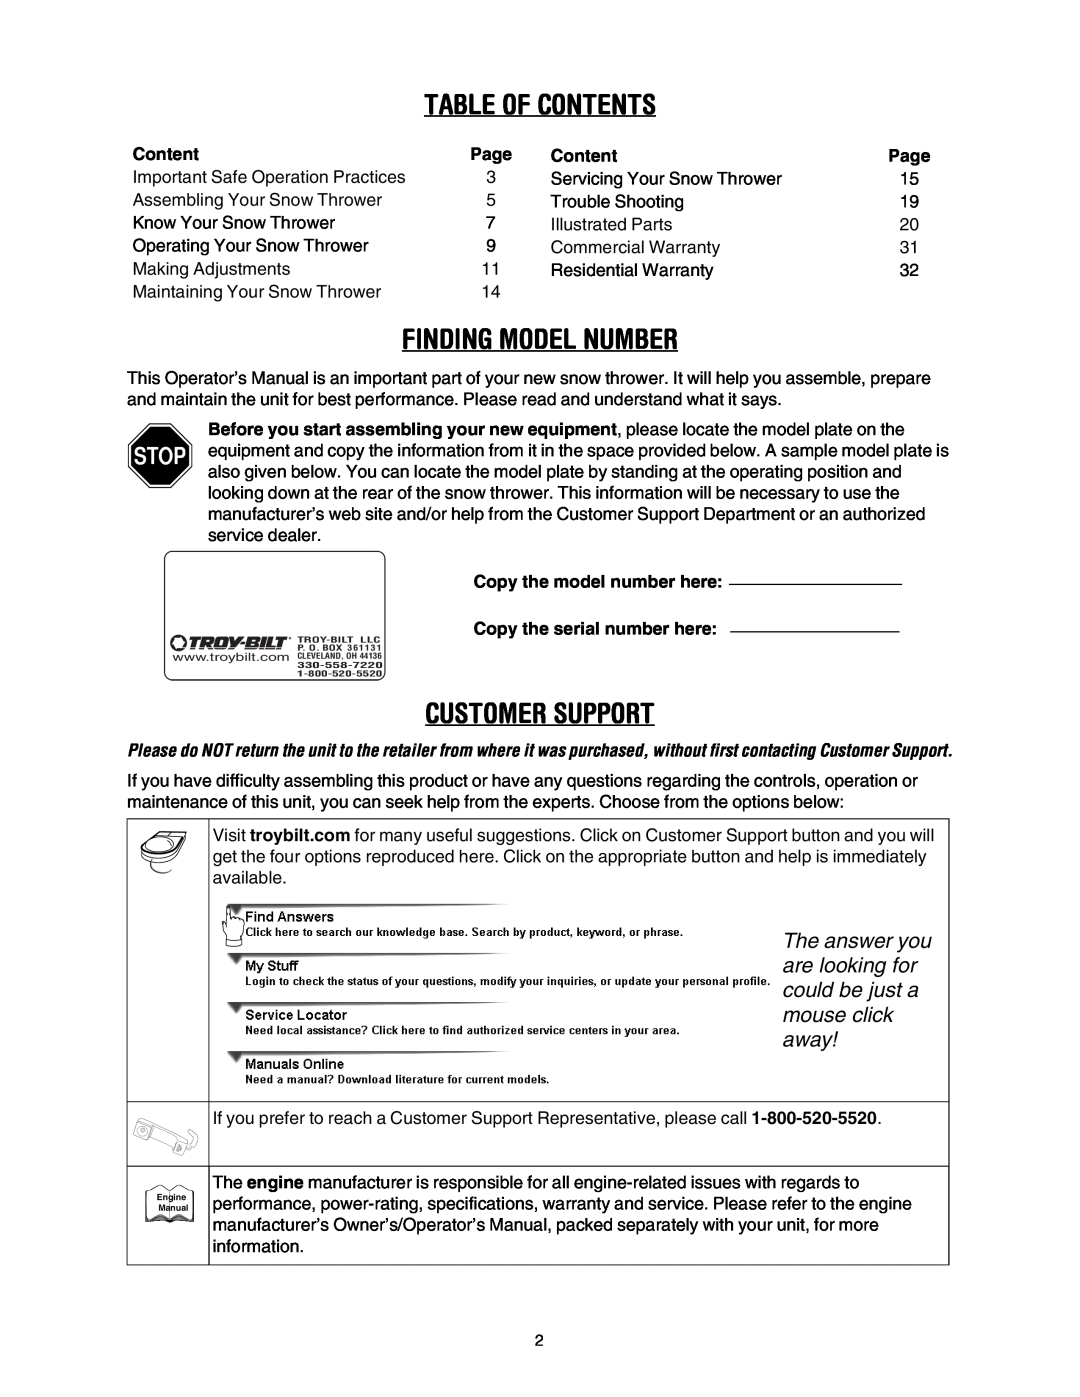 Troy-Bilt 10530 manual Table Of Contents, Finding Model Number, Customer Support, Page 